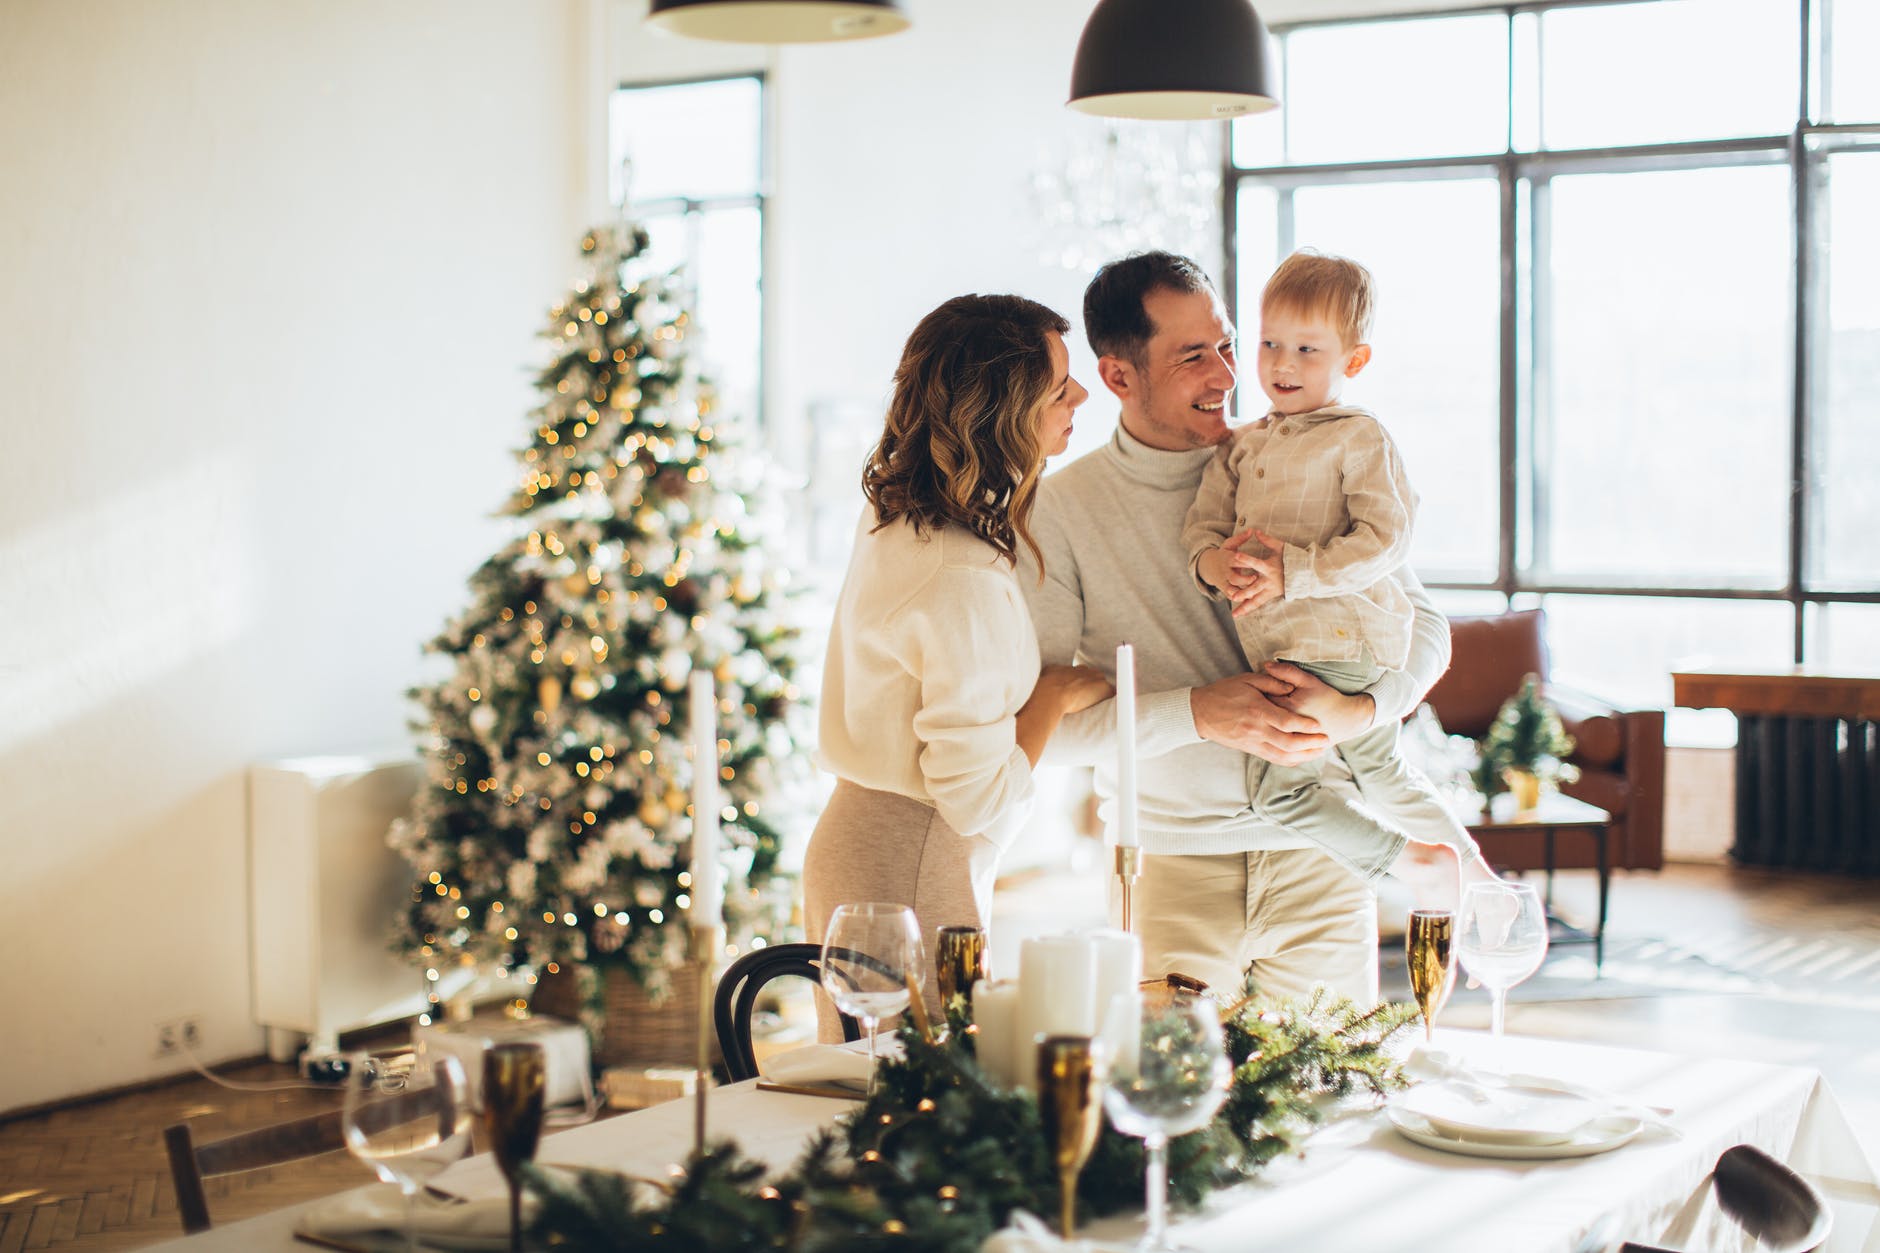 They had a joyful Christmas after. | Source: Pexels